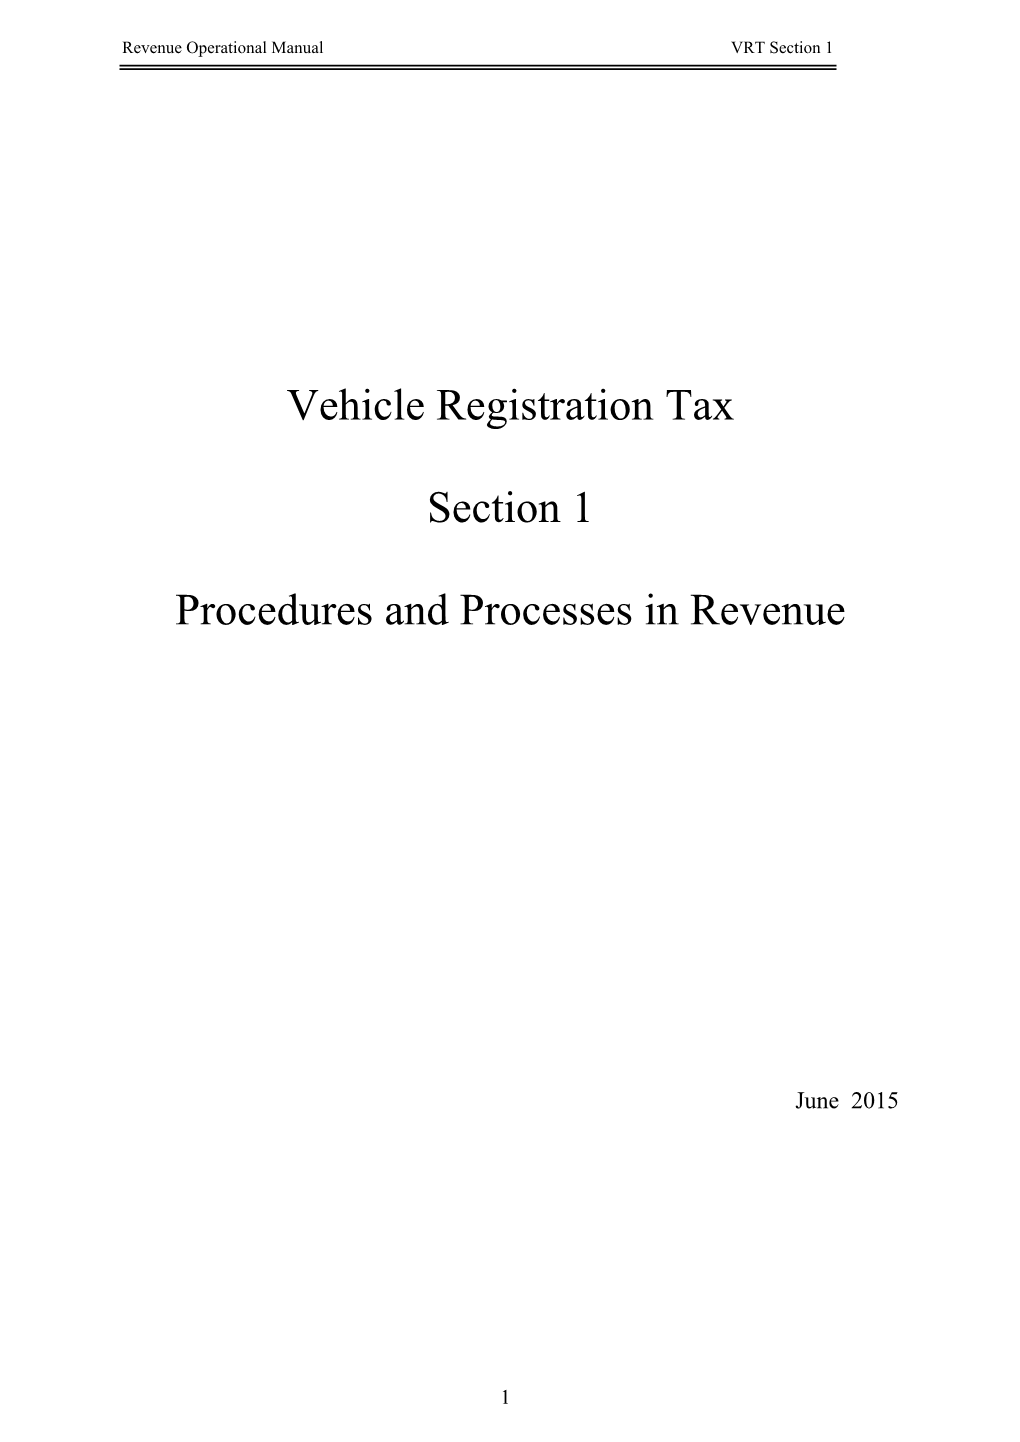 Vehicle Registration Tax Section 1 Procedures And